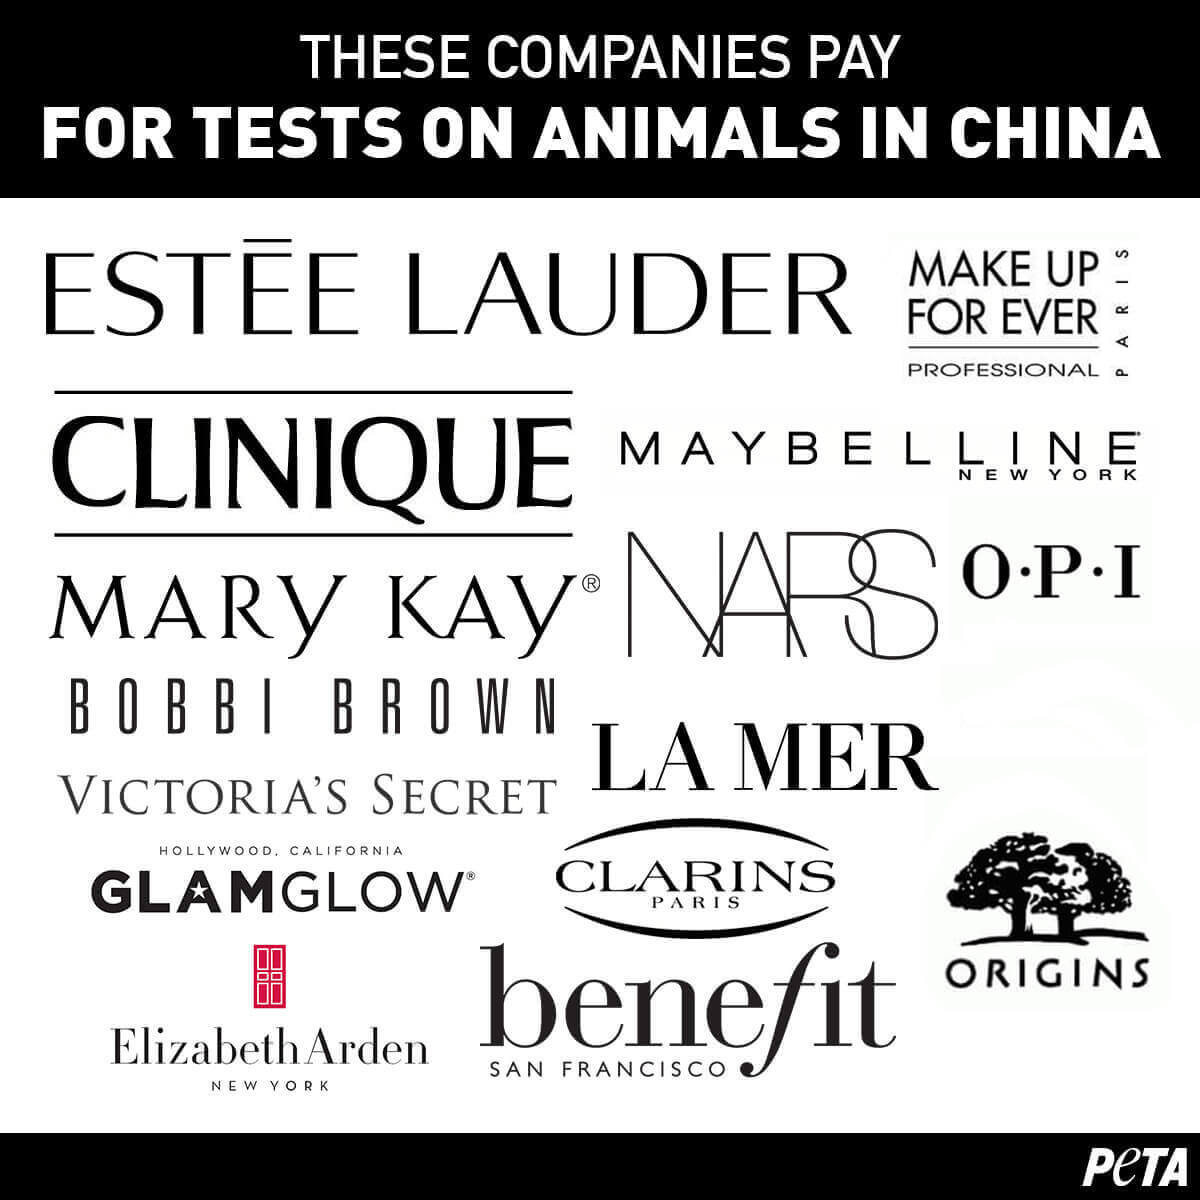 https://www.peta.org/wp-content/uploads/2015/07/beauty-brands-that-pay-for-animal-tests.jpg